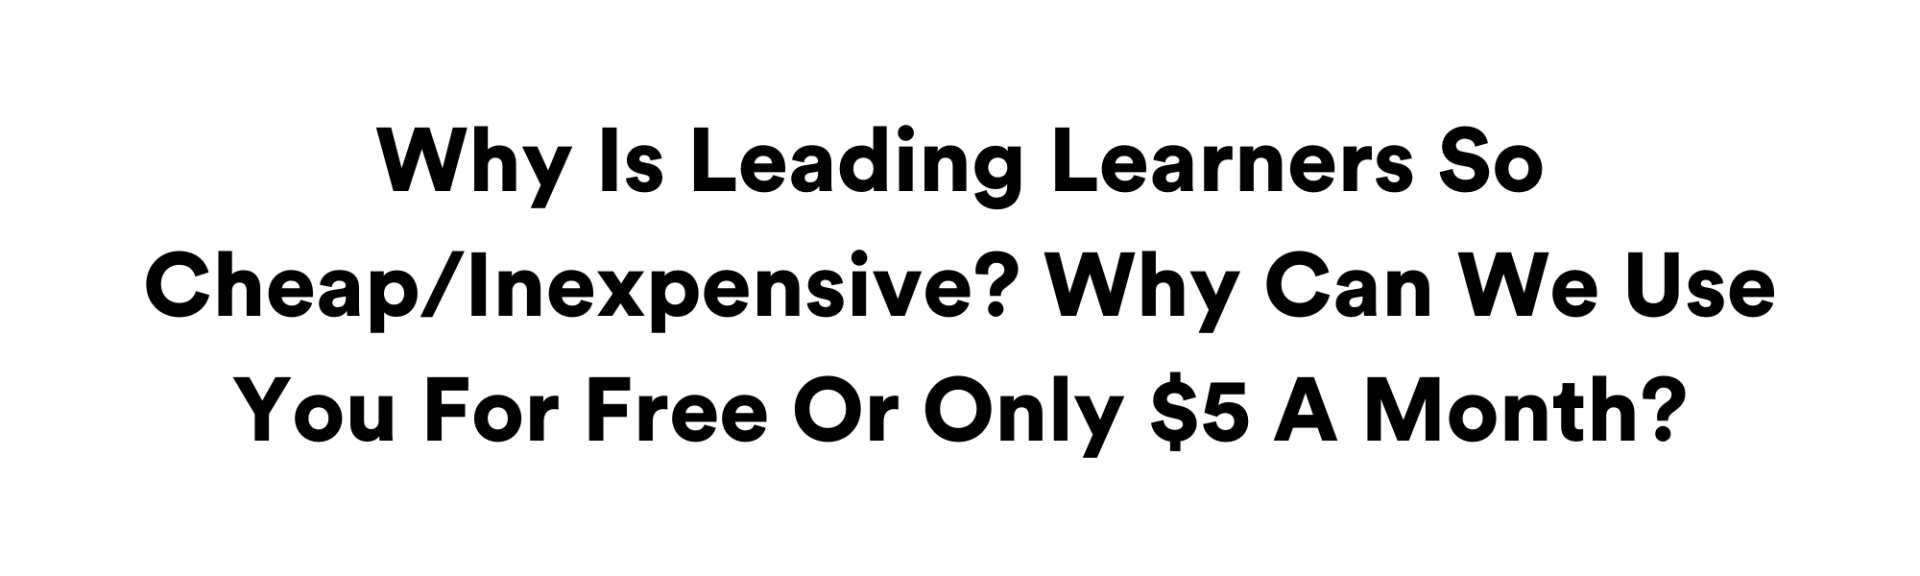 Why Is Leading Learners So Cheap/Inexpensive? Why Can We Use You For Free Or Only $5 A Month?